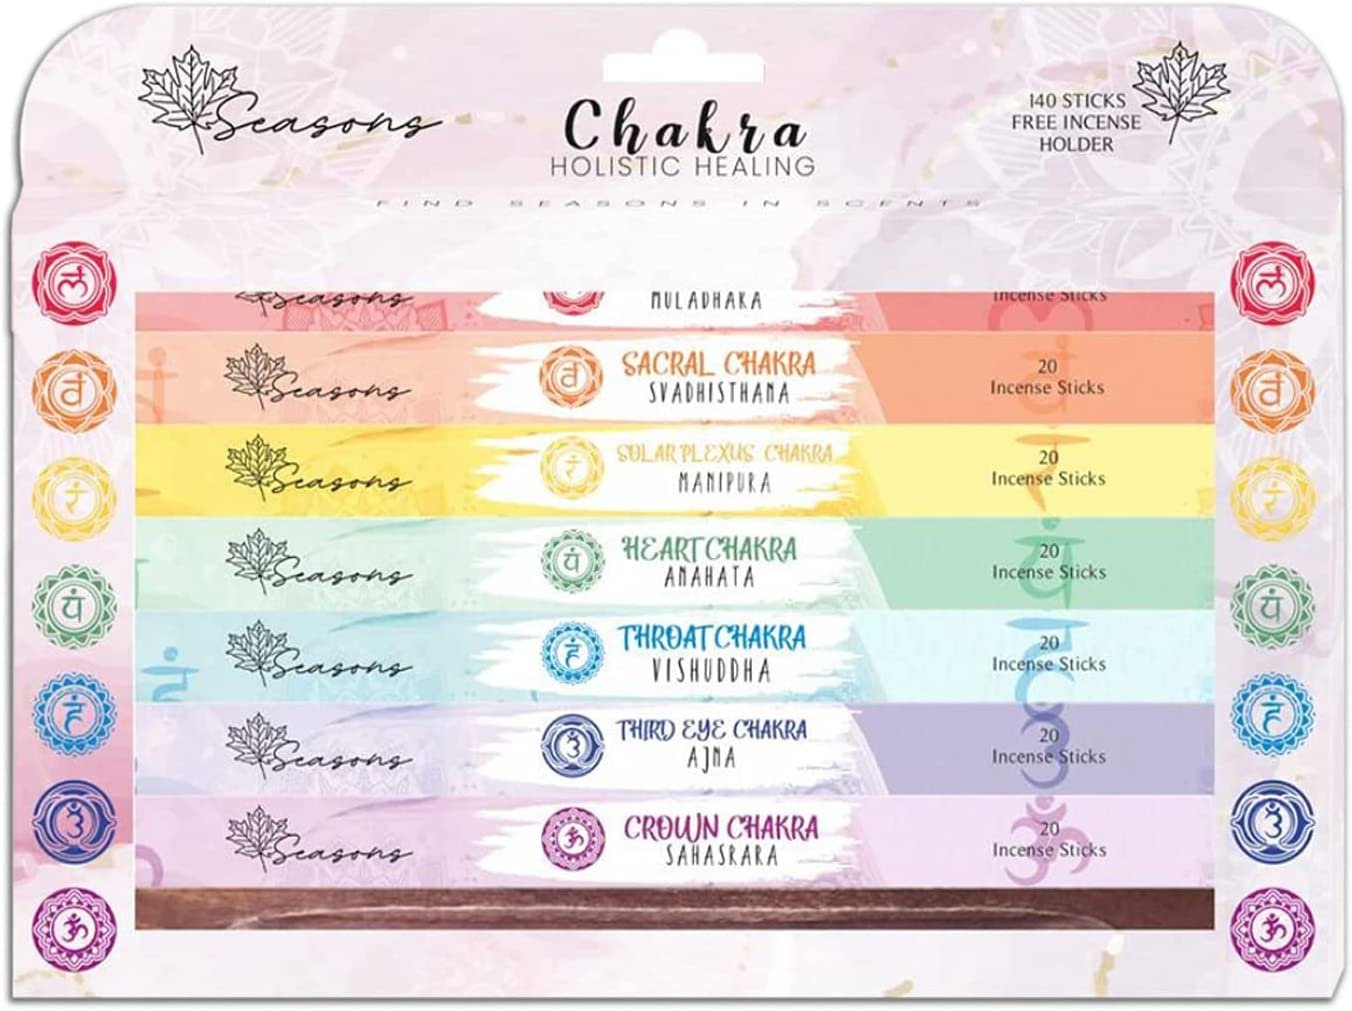 Seasons 7 Chakra Balancing Incense Sticks and Holder for Cleansing, Meditation, Sleep, Relaxation and Aromatherapy- 140 Incense Sticks (20 Sticks/Pack x 7 variations)